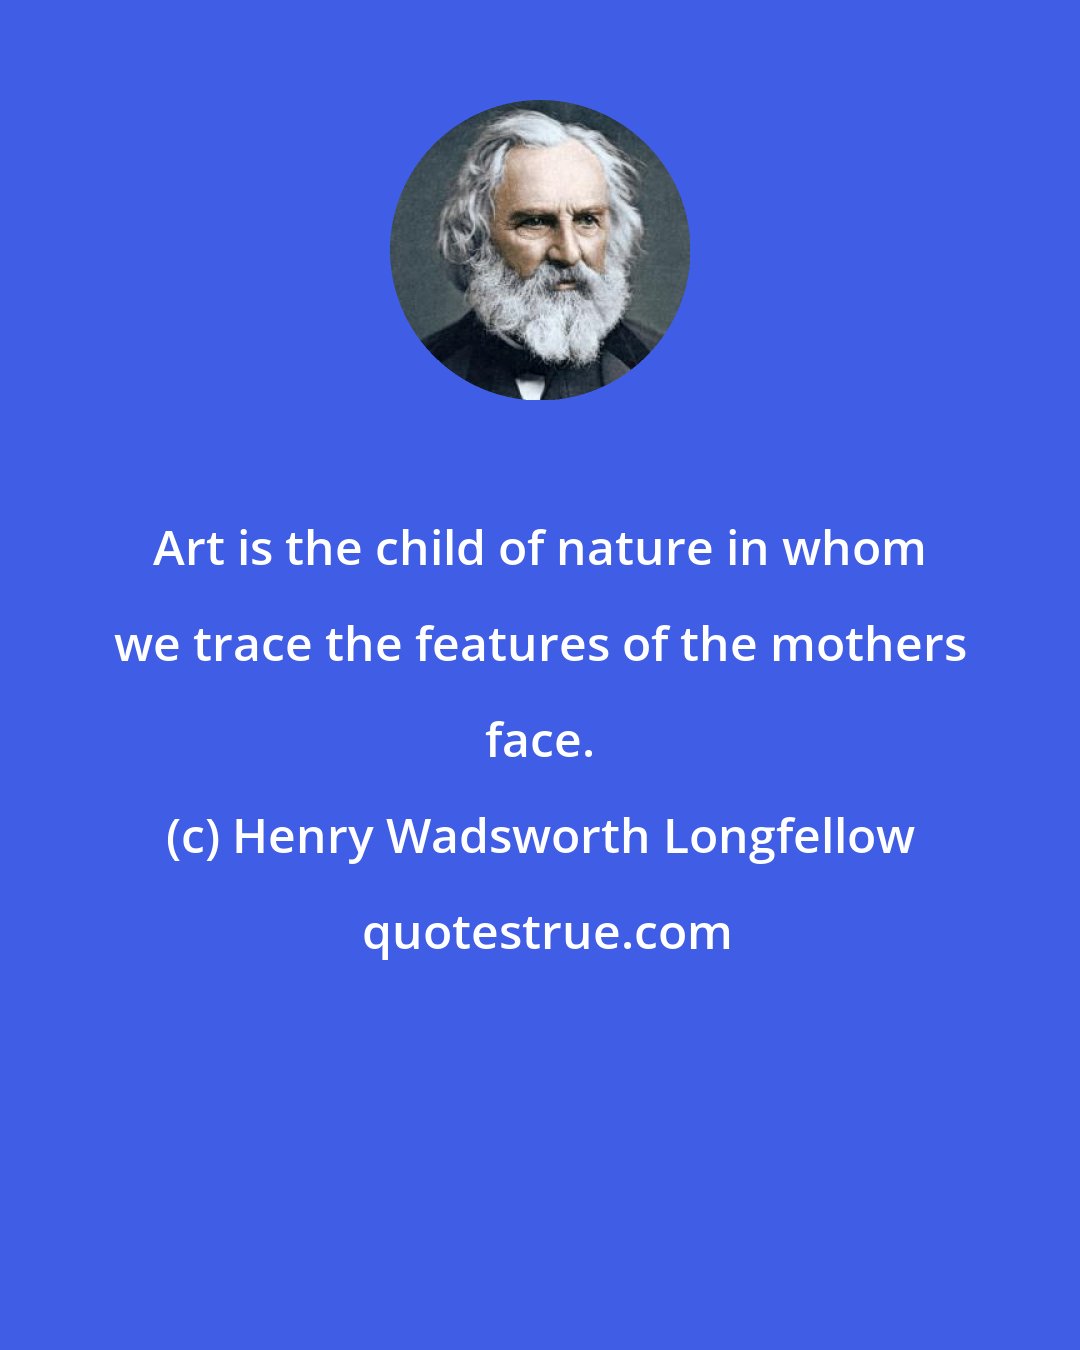 Henry Wadsworth Longfellow: Art is the child of nature in whom we trace the features of the mothers face.